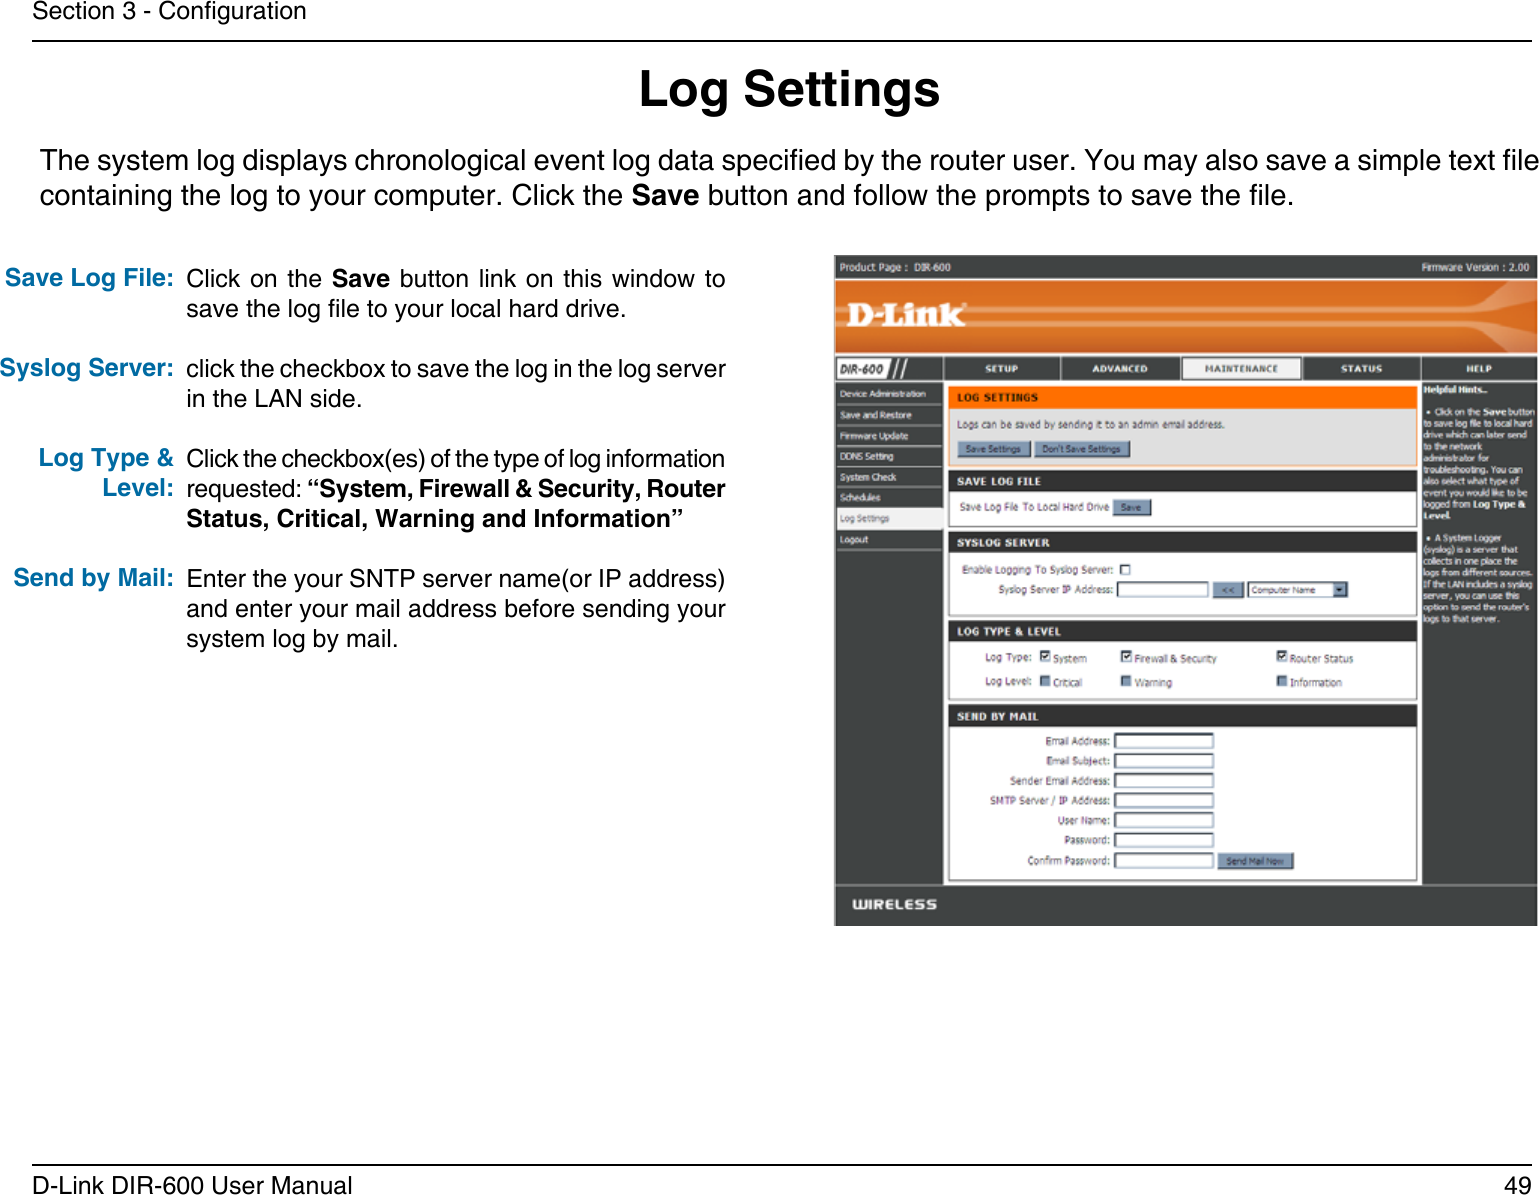 49D-Link DIR-600 User ManualSection 3 - CongurationLog SettingsClick on the Save button link on this window to save the log le to your local hard drive.click the checkbox to save the log in the log server in the LAN side.Click the checkbox(es) of the type of log information requested: “System, Firewall &amp; Security, Router Status, Critical, Warning and Information”Enter the your SNTP server name(or IP address) and enter your mail address before sending your system log by mail.Save Log File:Syslog Server:Log Type &amp; Level:Send by Mail:The system log displays chronological event log data specied by the router user. You may also save a simple text le containing the log to your computer. Click the Save button and follow the prompts to save the le.